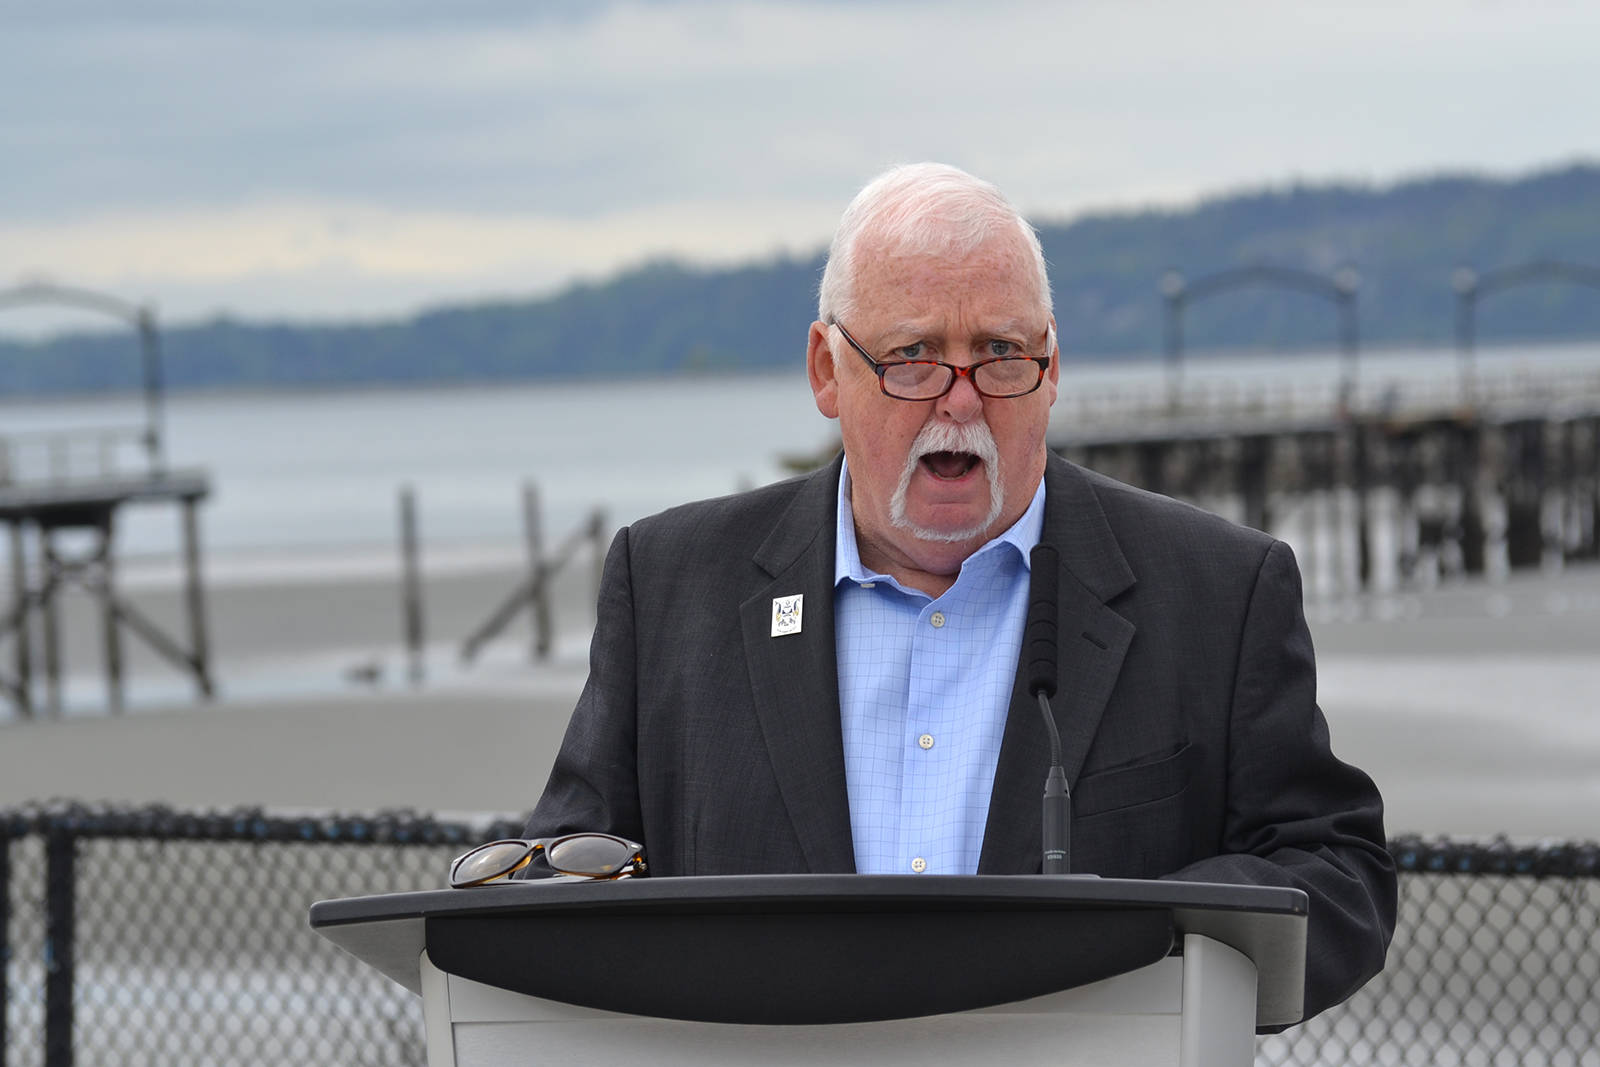 White Rock Mayor Darryl Walker speaks during Friday morning’s announcement of $1-million in provincial funding for White Rock Pier repair and waterfront restoration. (Nick Greenizan photo)